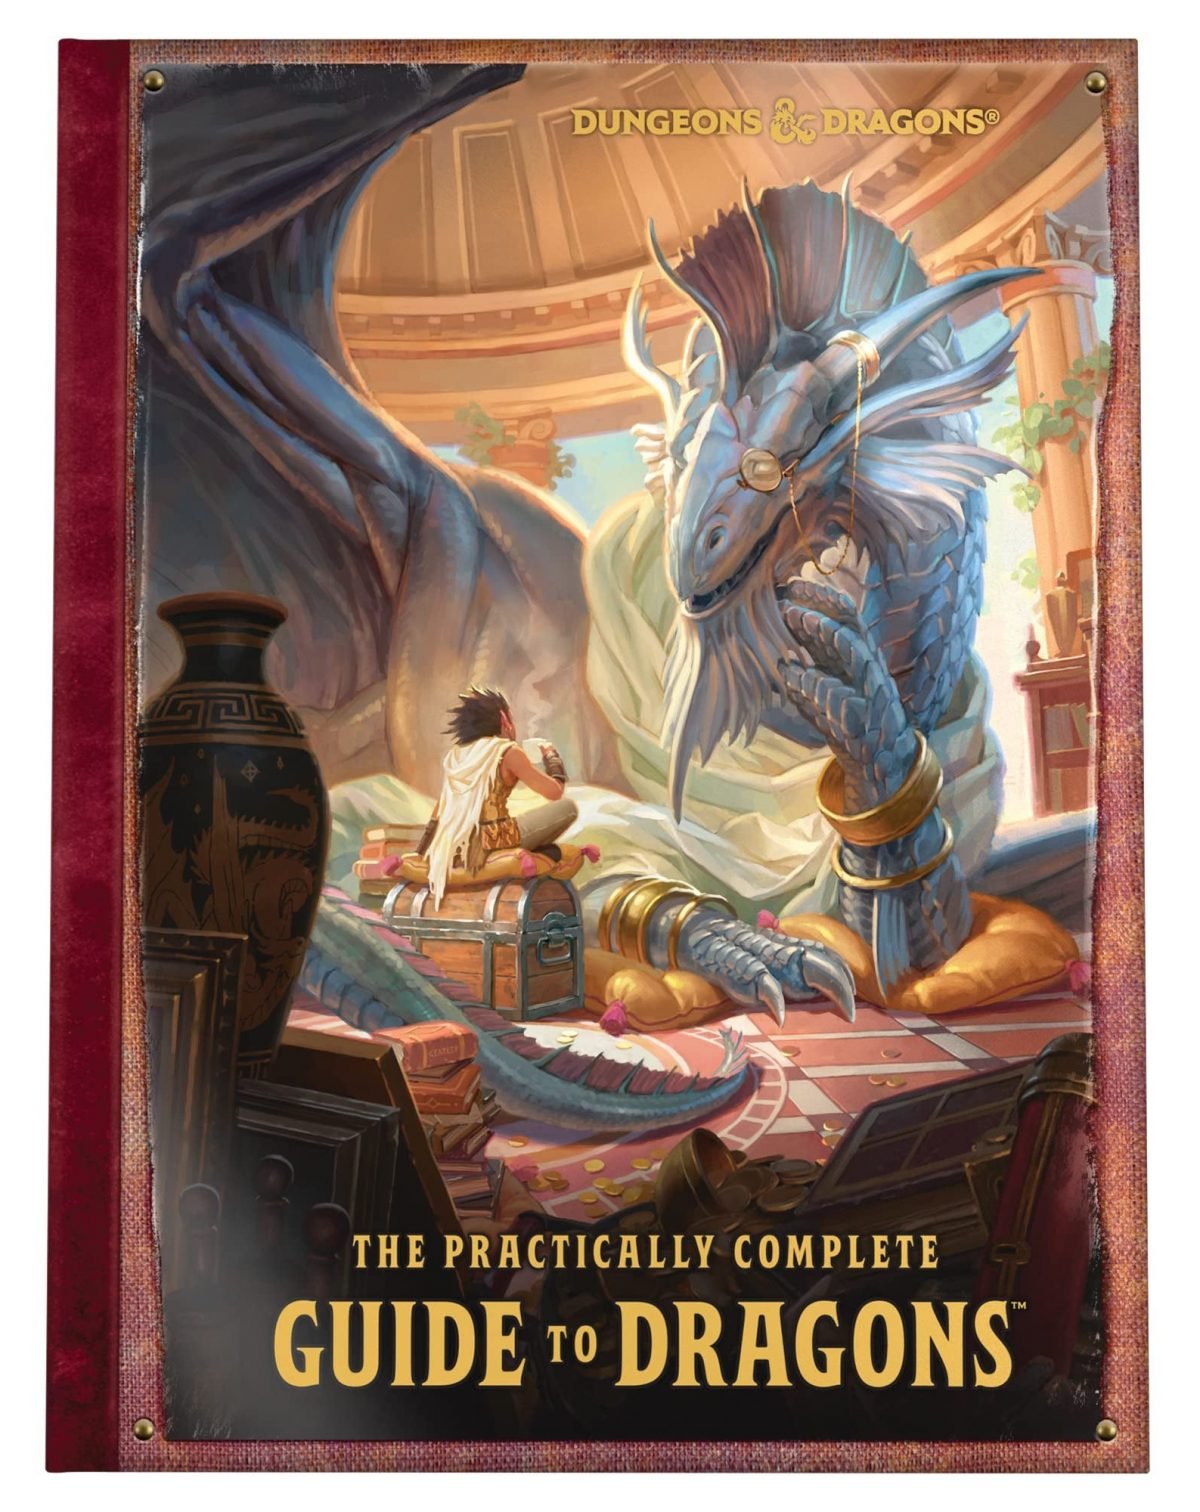 An illustration of a scholarly dragon on the cover of The Practically Complete Guide to Dragons